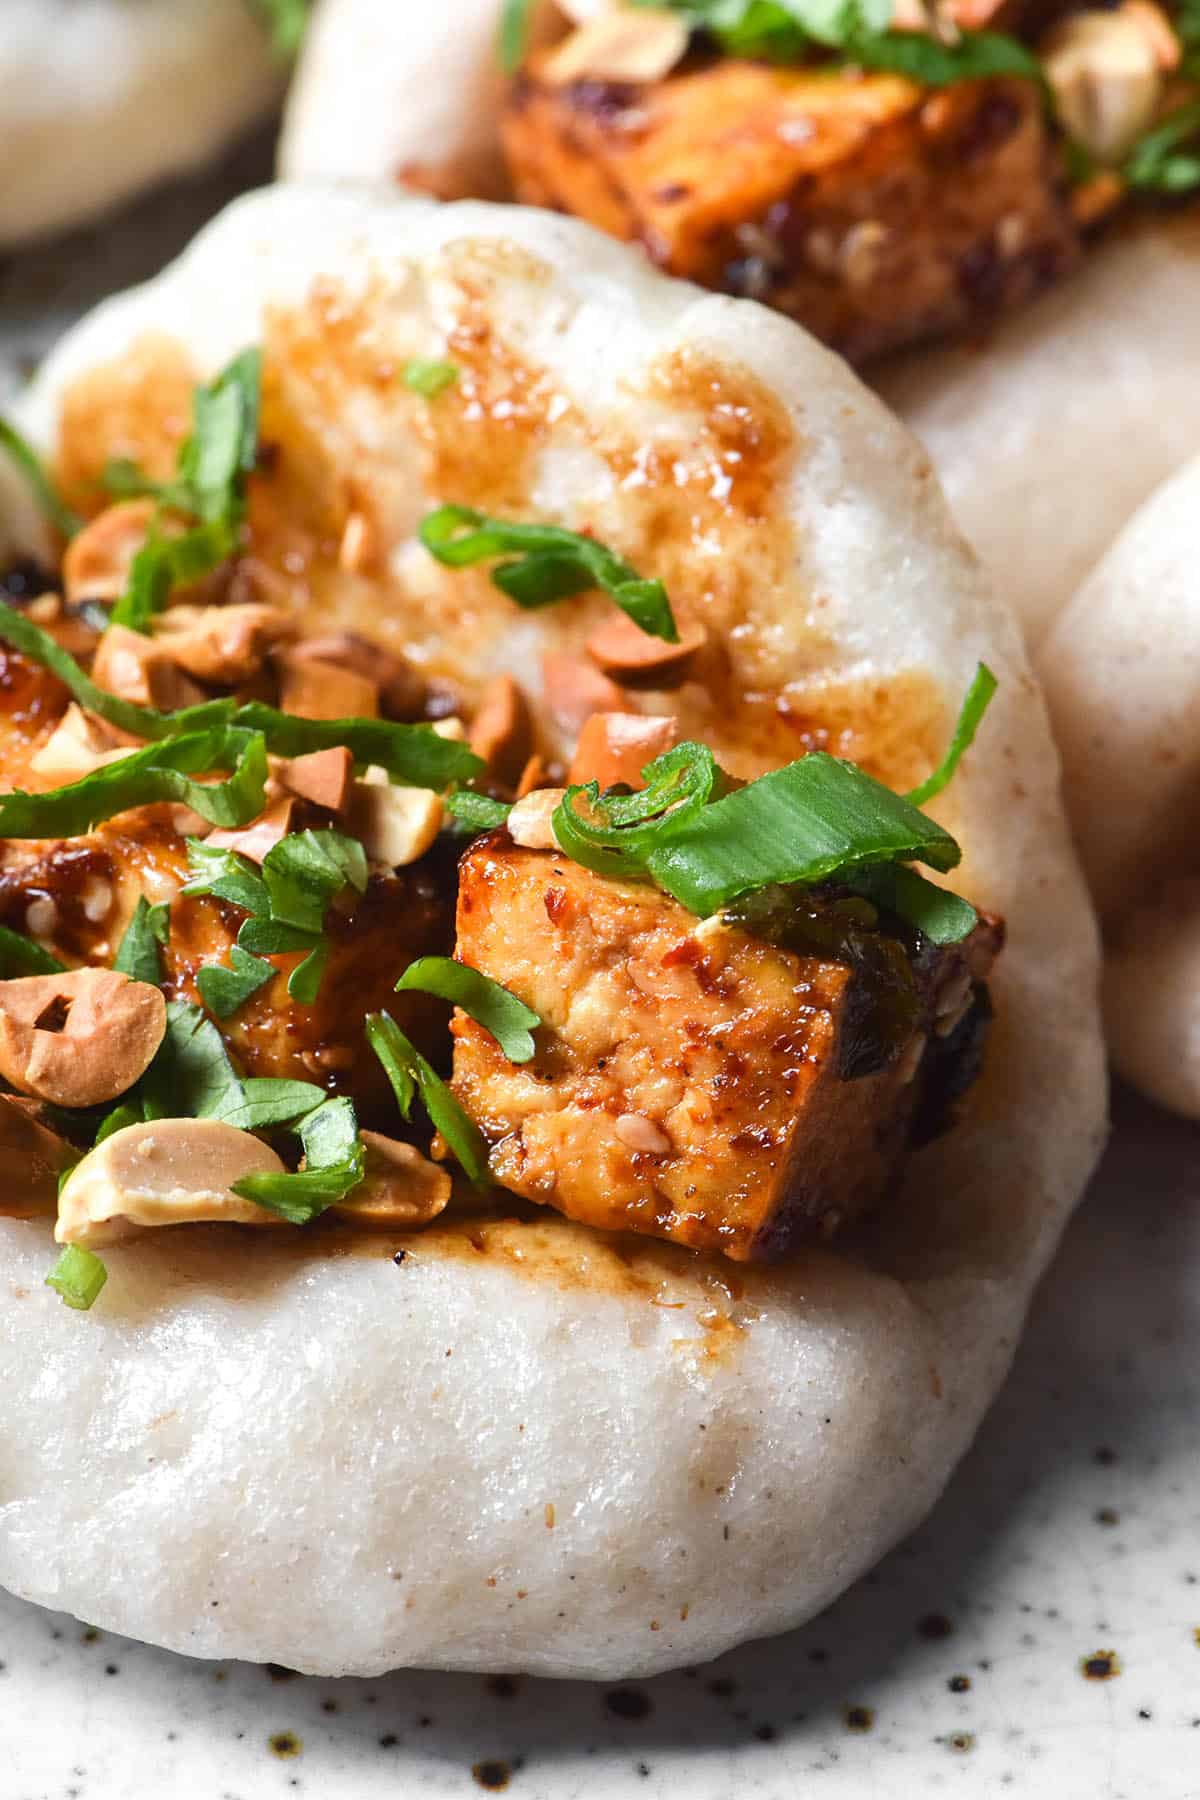 A macro close up of a gluten free bao bun filled with chilli tofu, hoisin sauce, peanuts and spring onion greens